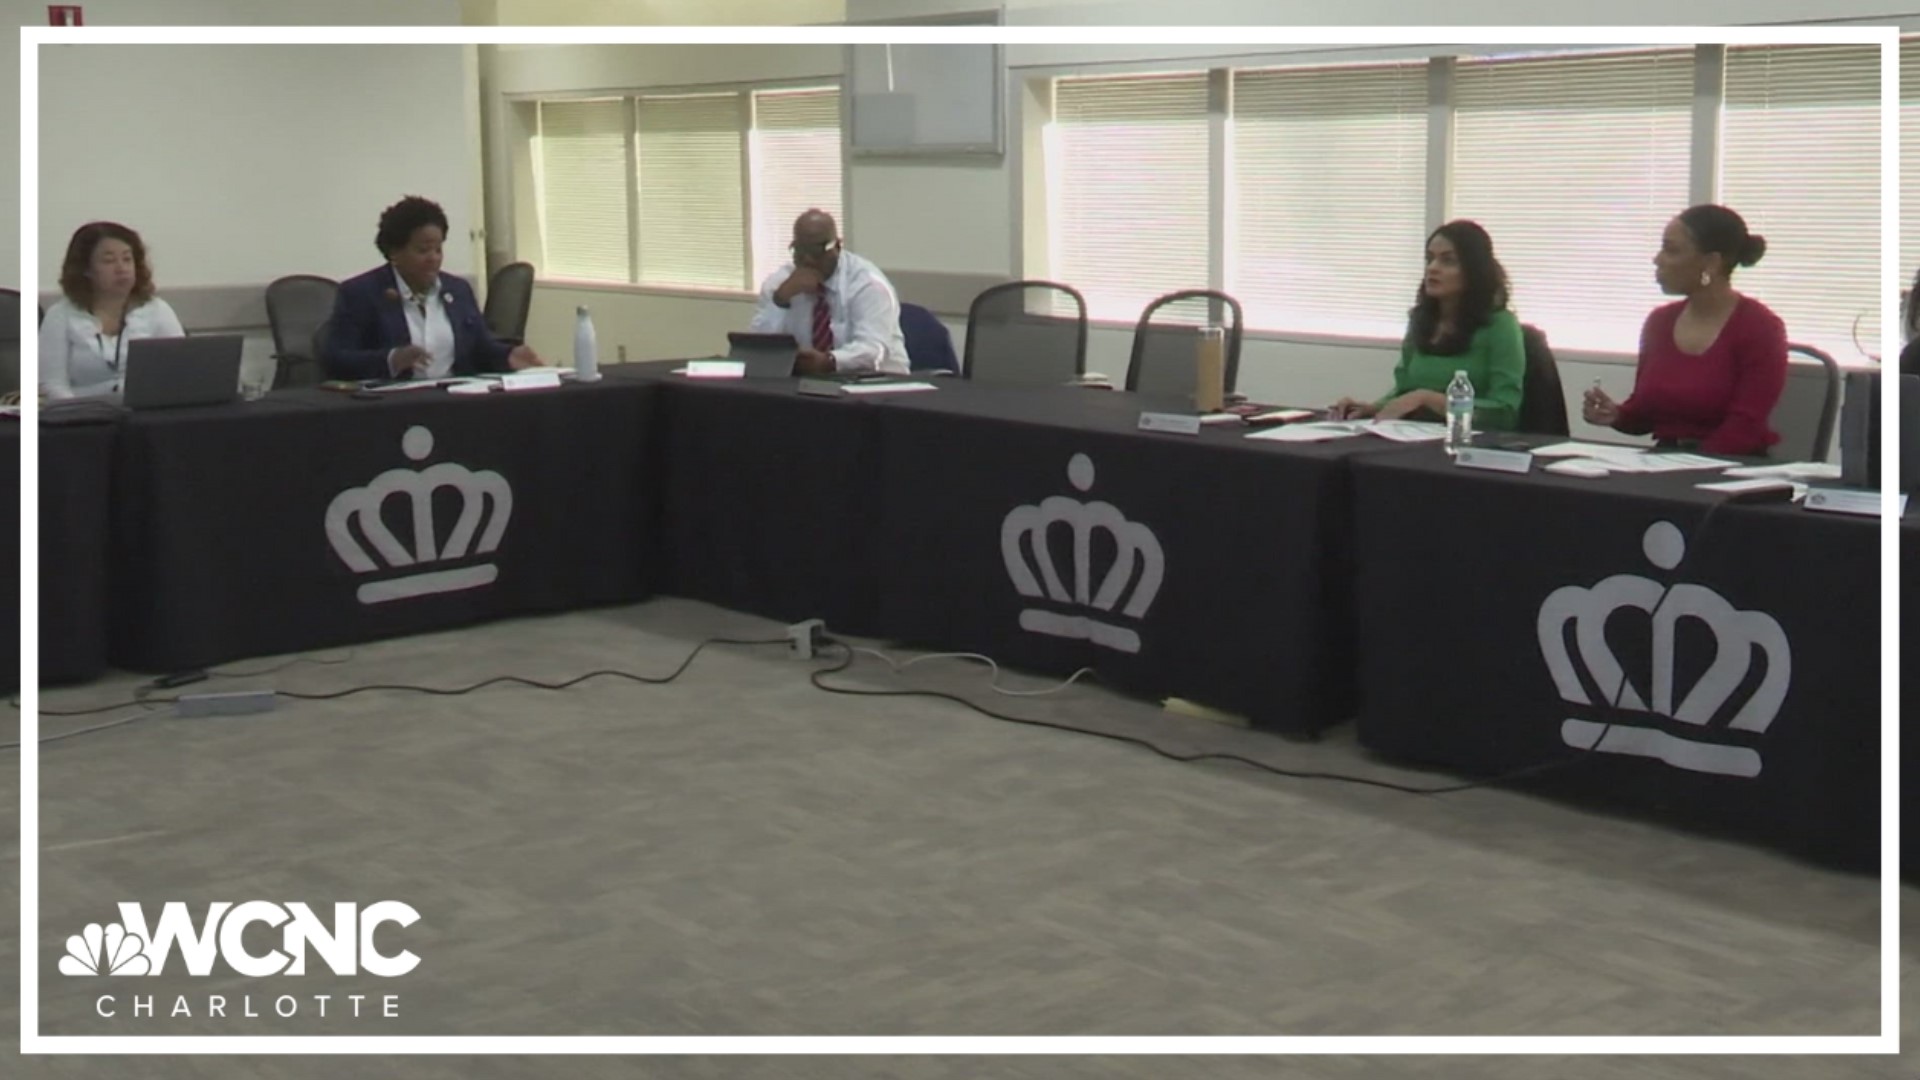 On Monday night, Charlotte City Council’s Housing, Safety, and Community Committee met with staff members to begin discussions on the plan's priorities.